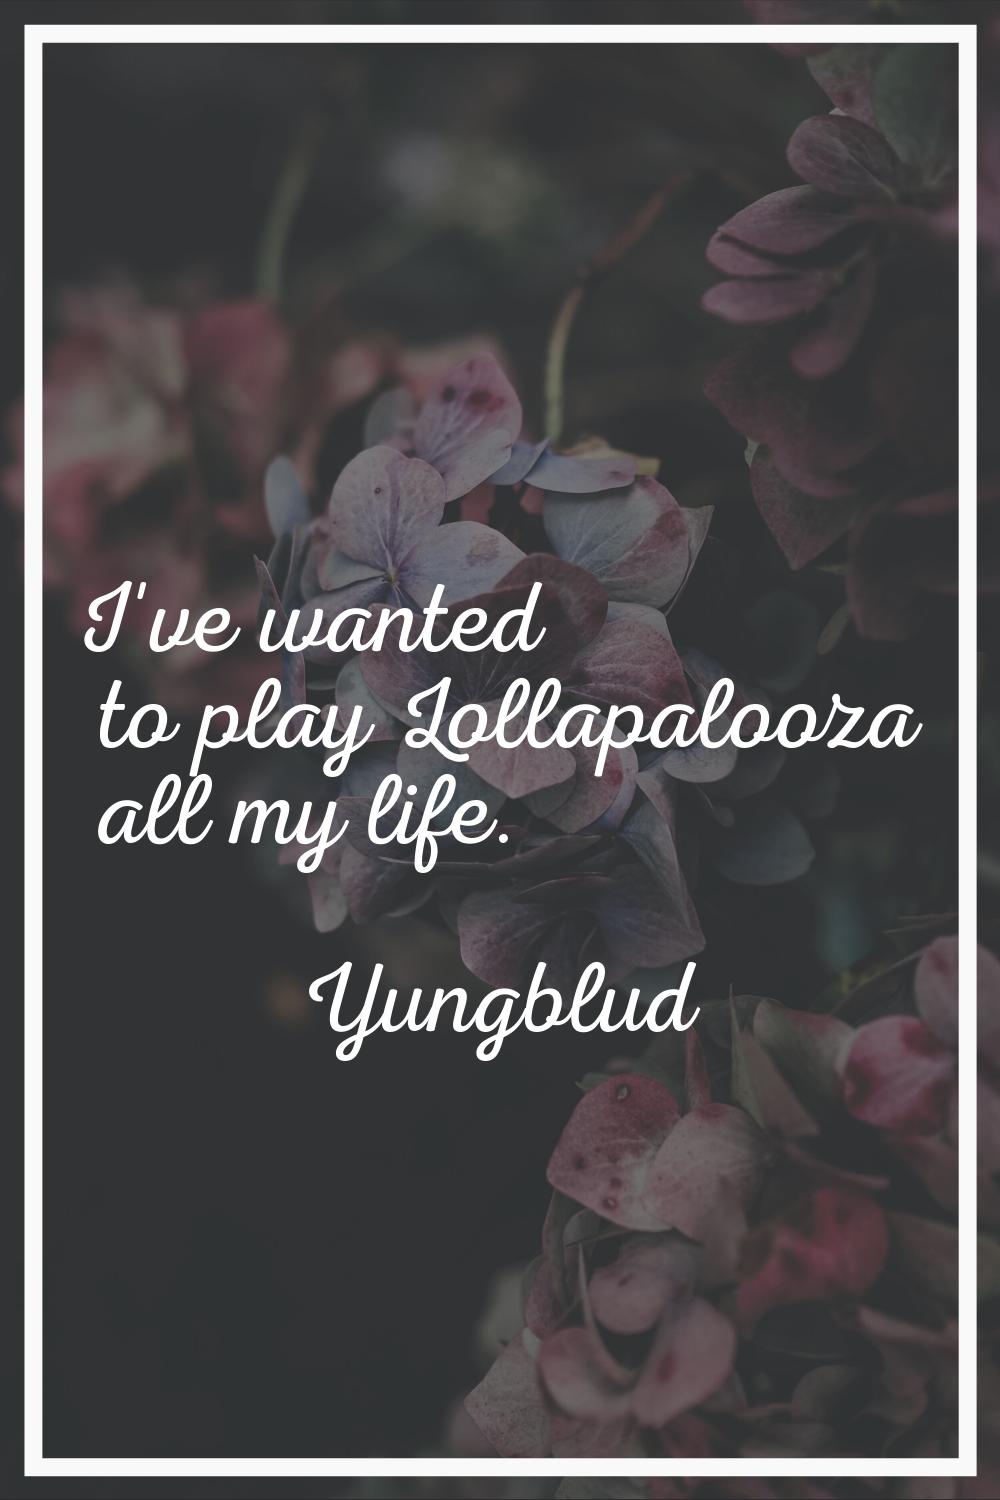 I've wanted to play Lollapalooza all my life.